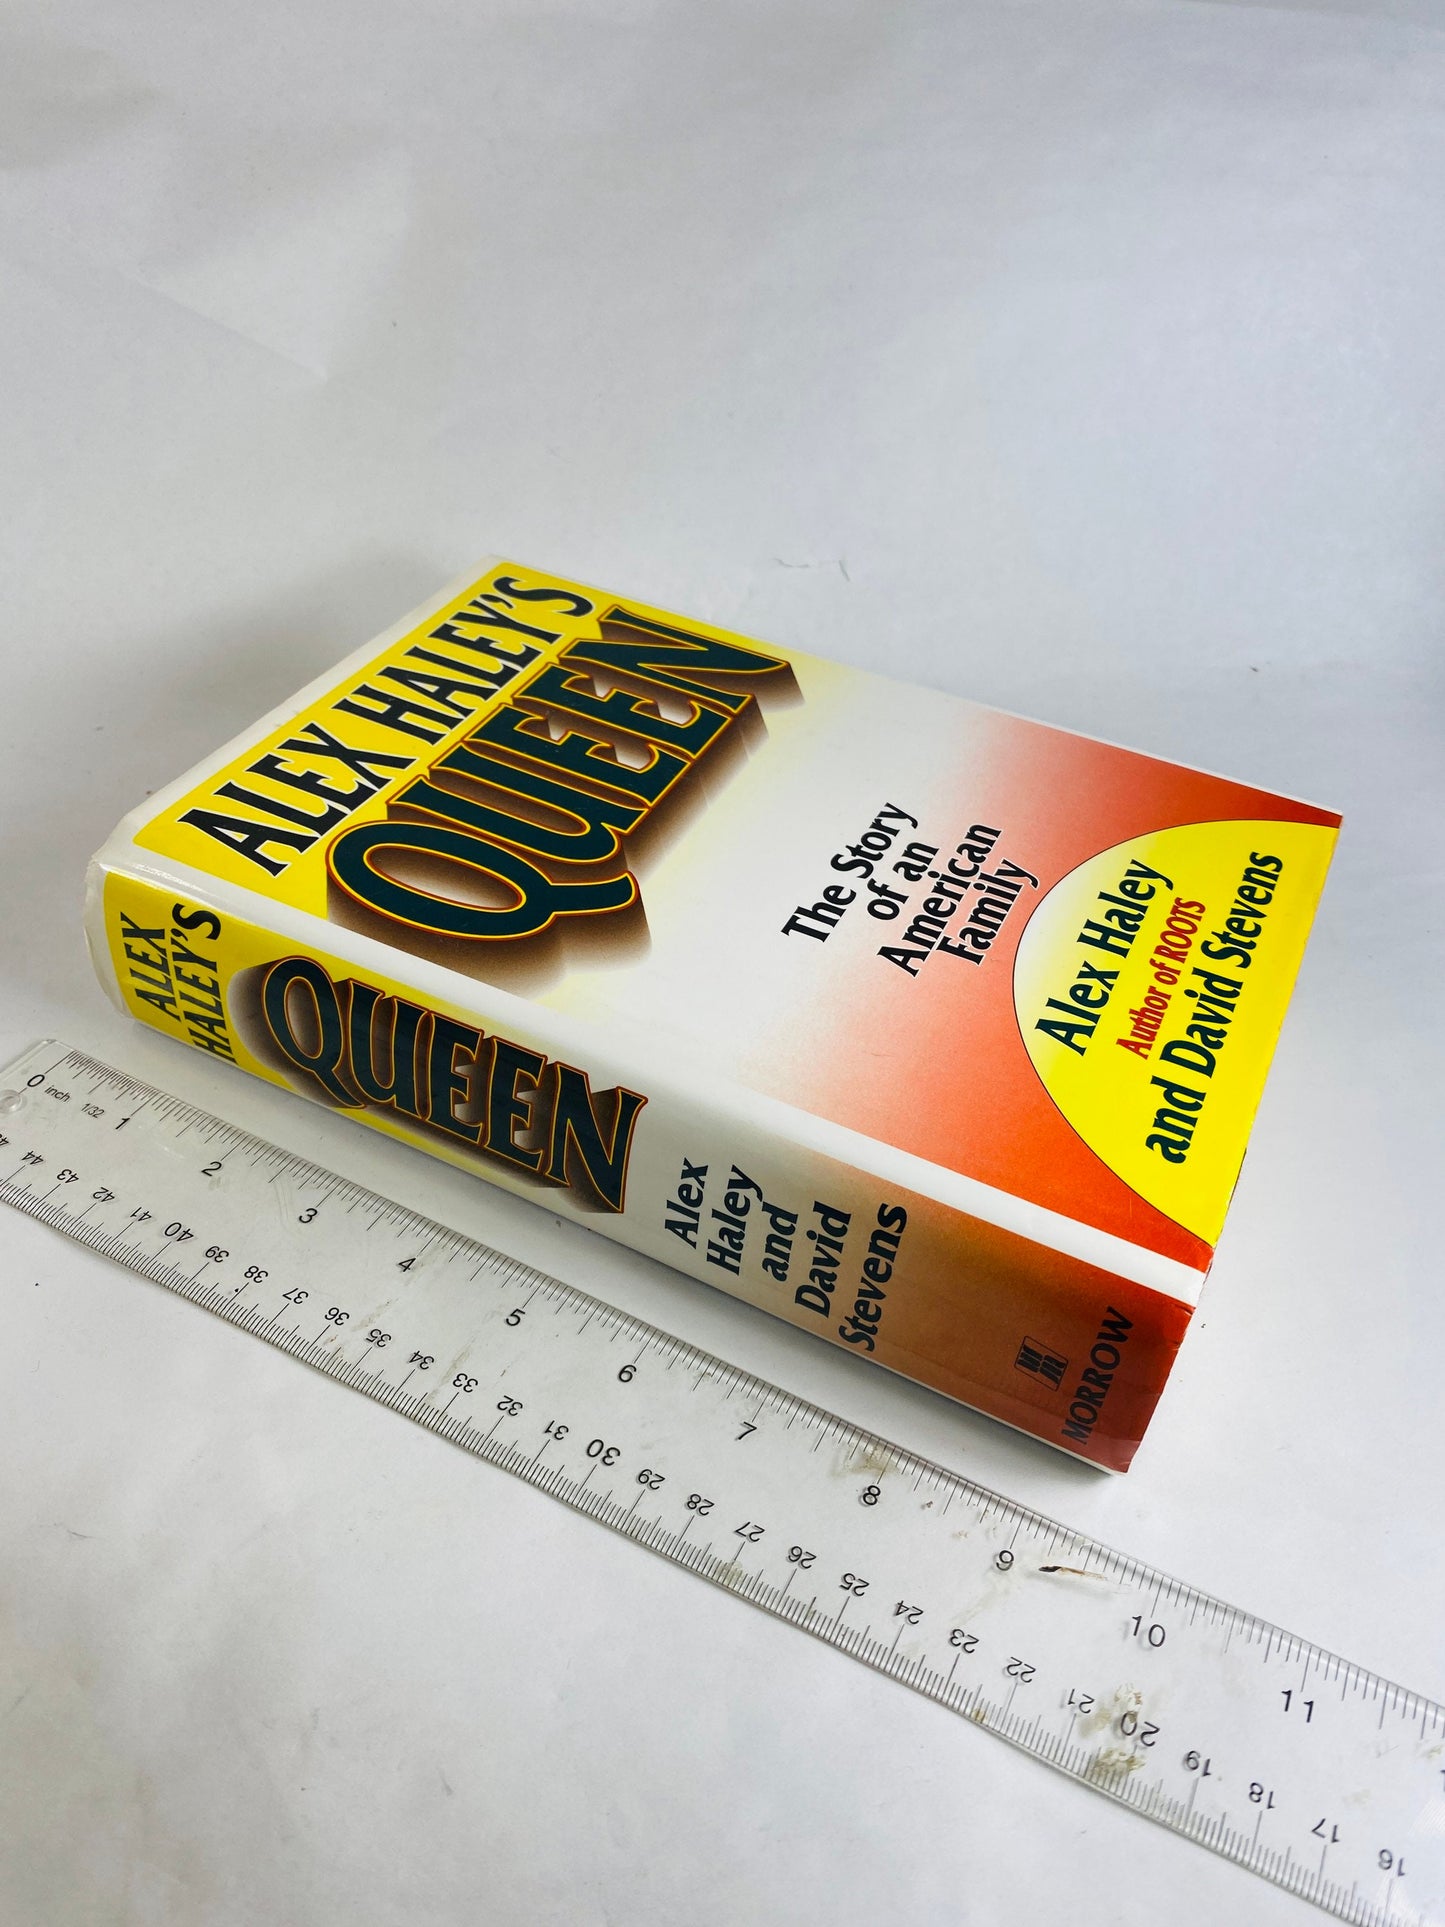 Queen Vintage book by Alex Haley, author of RootsCollectible piece of important literature with dust jacket circa 1992.